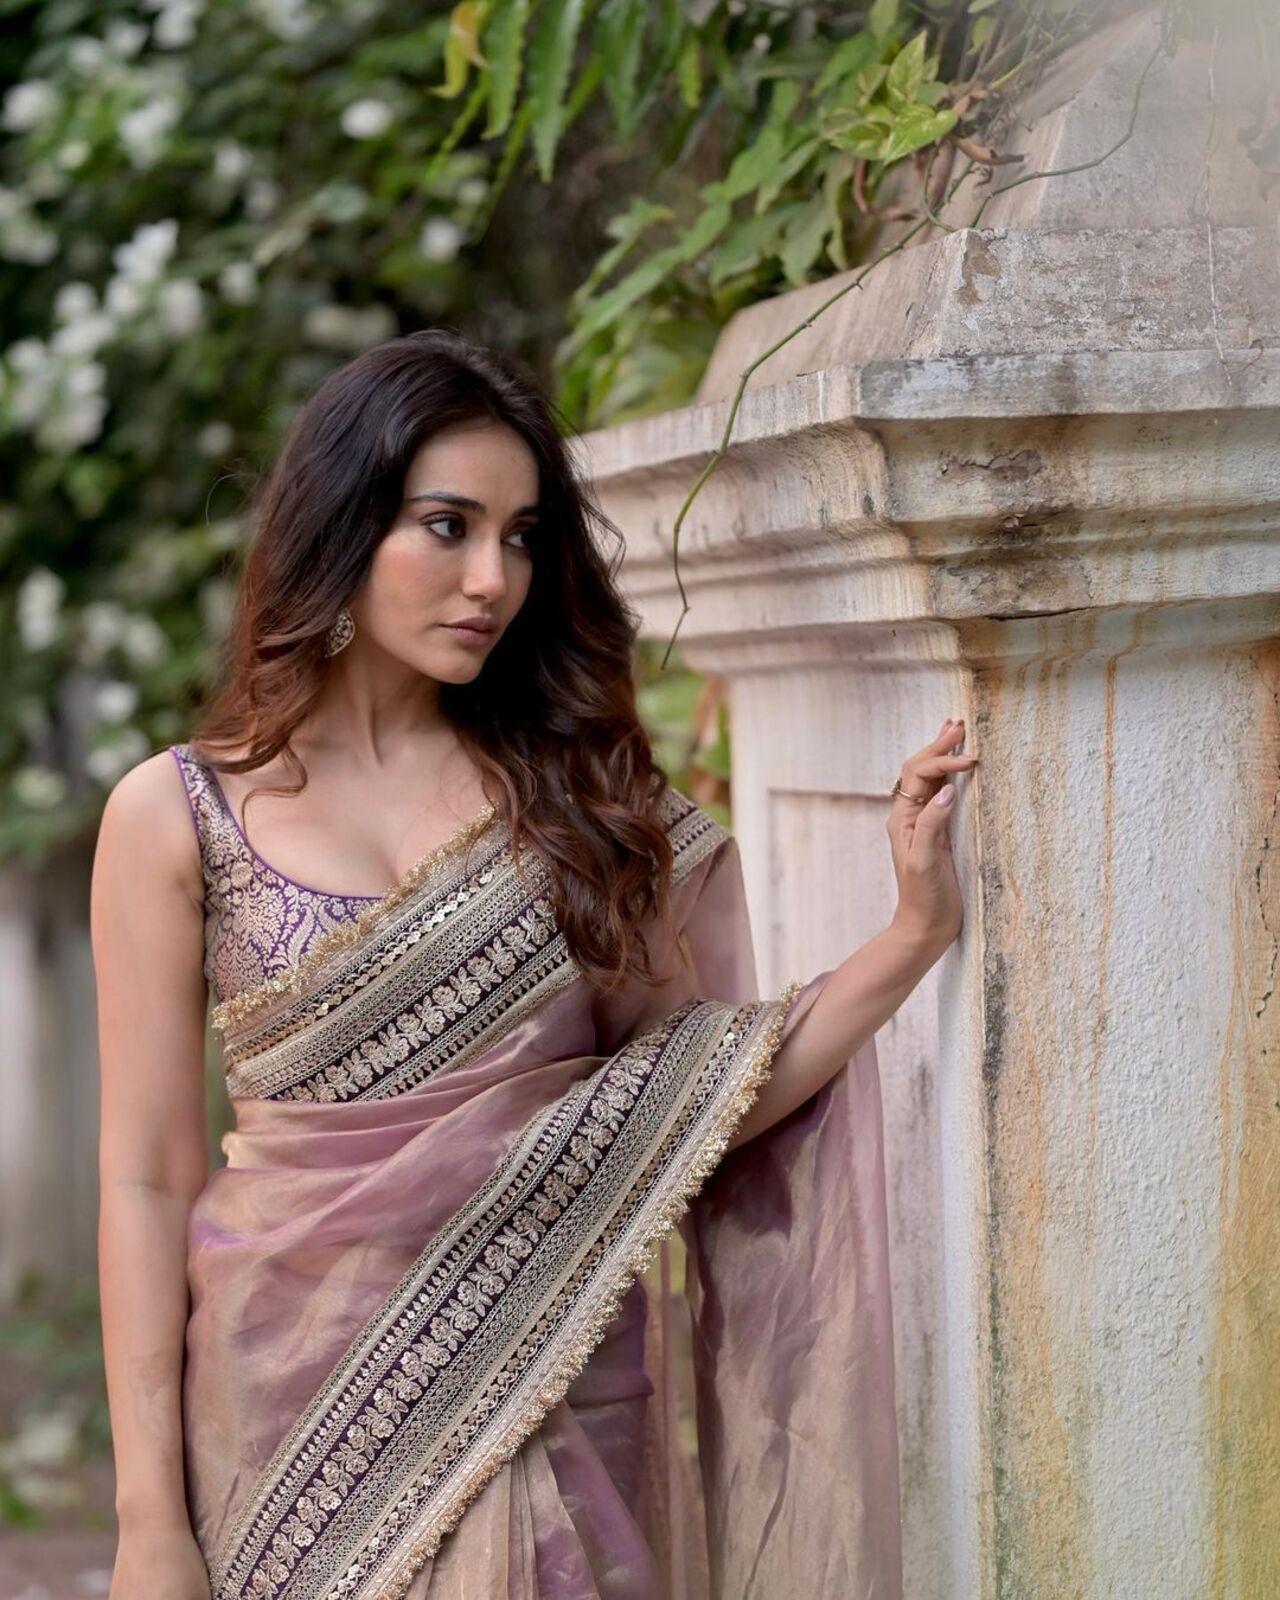 Surbhi Jyoti gracefully donned a stunning pink saree delicately infused with a touch of purple